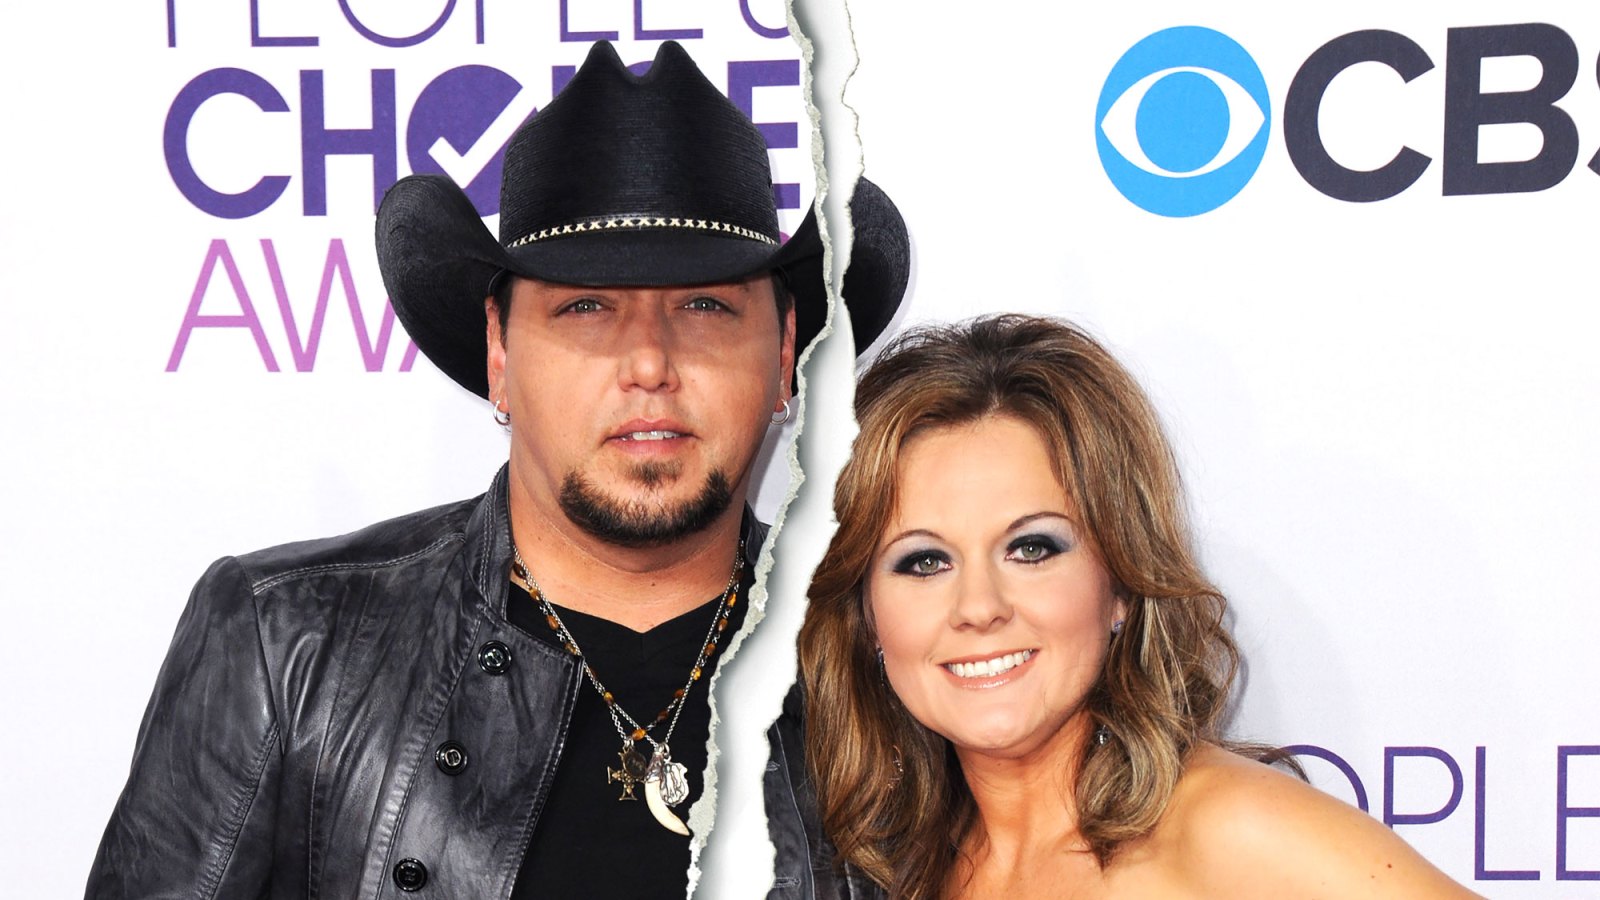 Jason-Aldean-Files-for-Divorce-From-Jessica-Ussery-After-Cheating-Scandal-Jason-Aldean-Jessica-Ussery-1